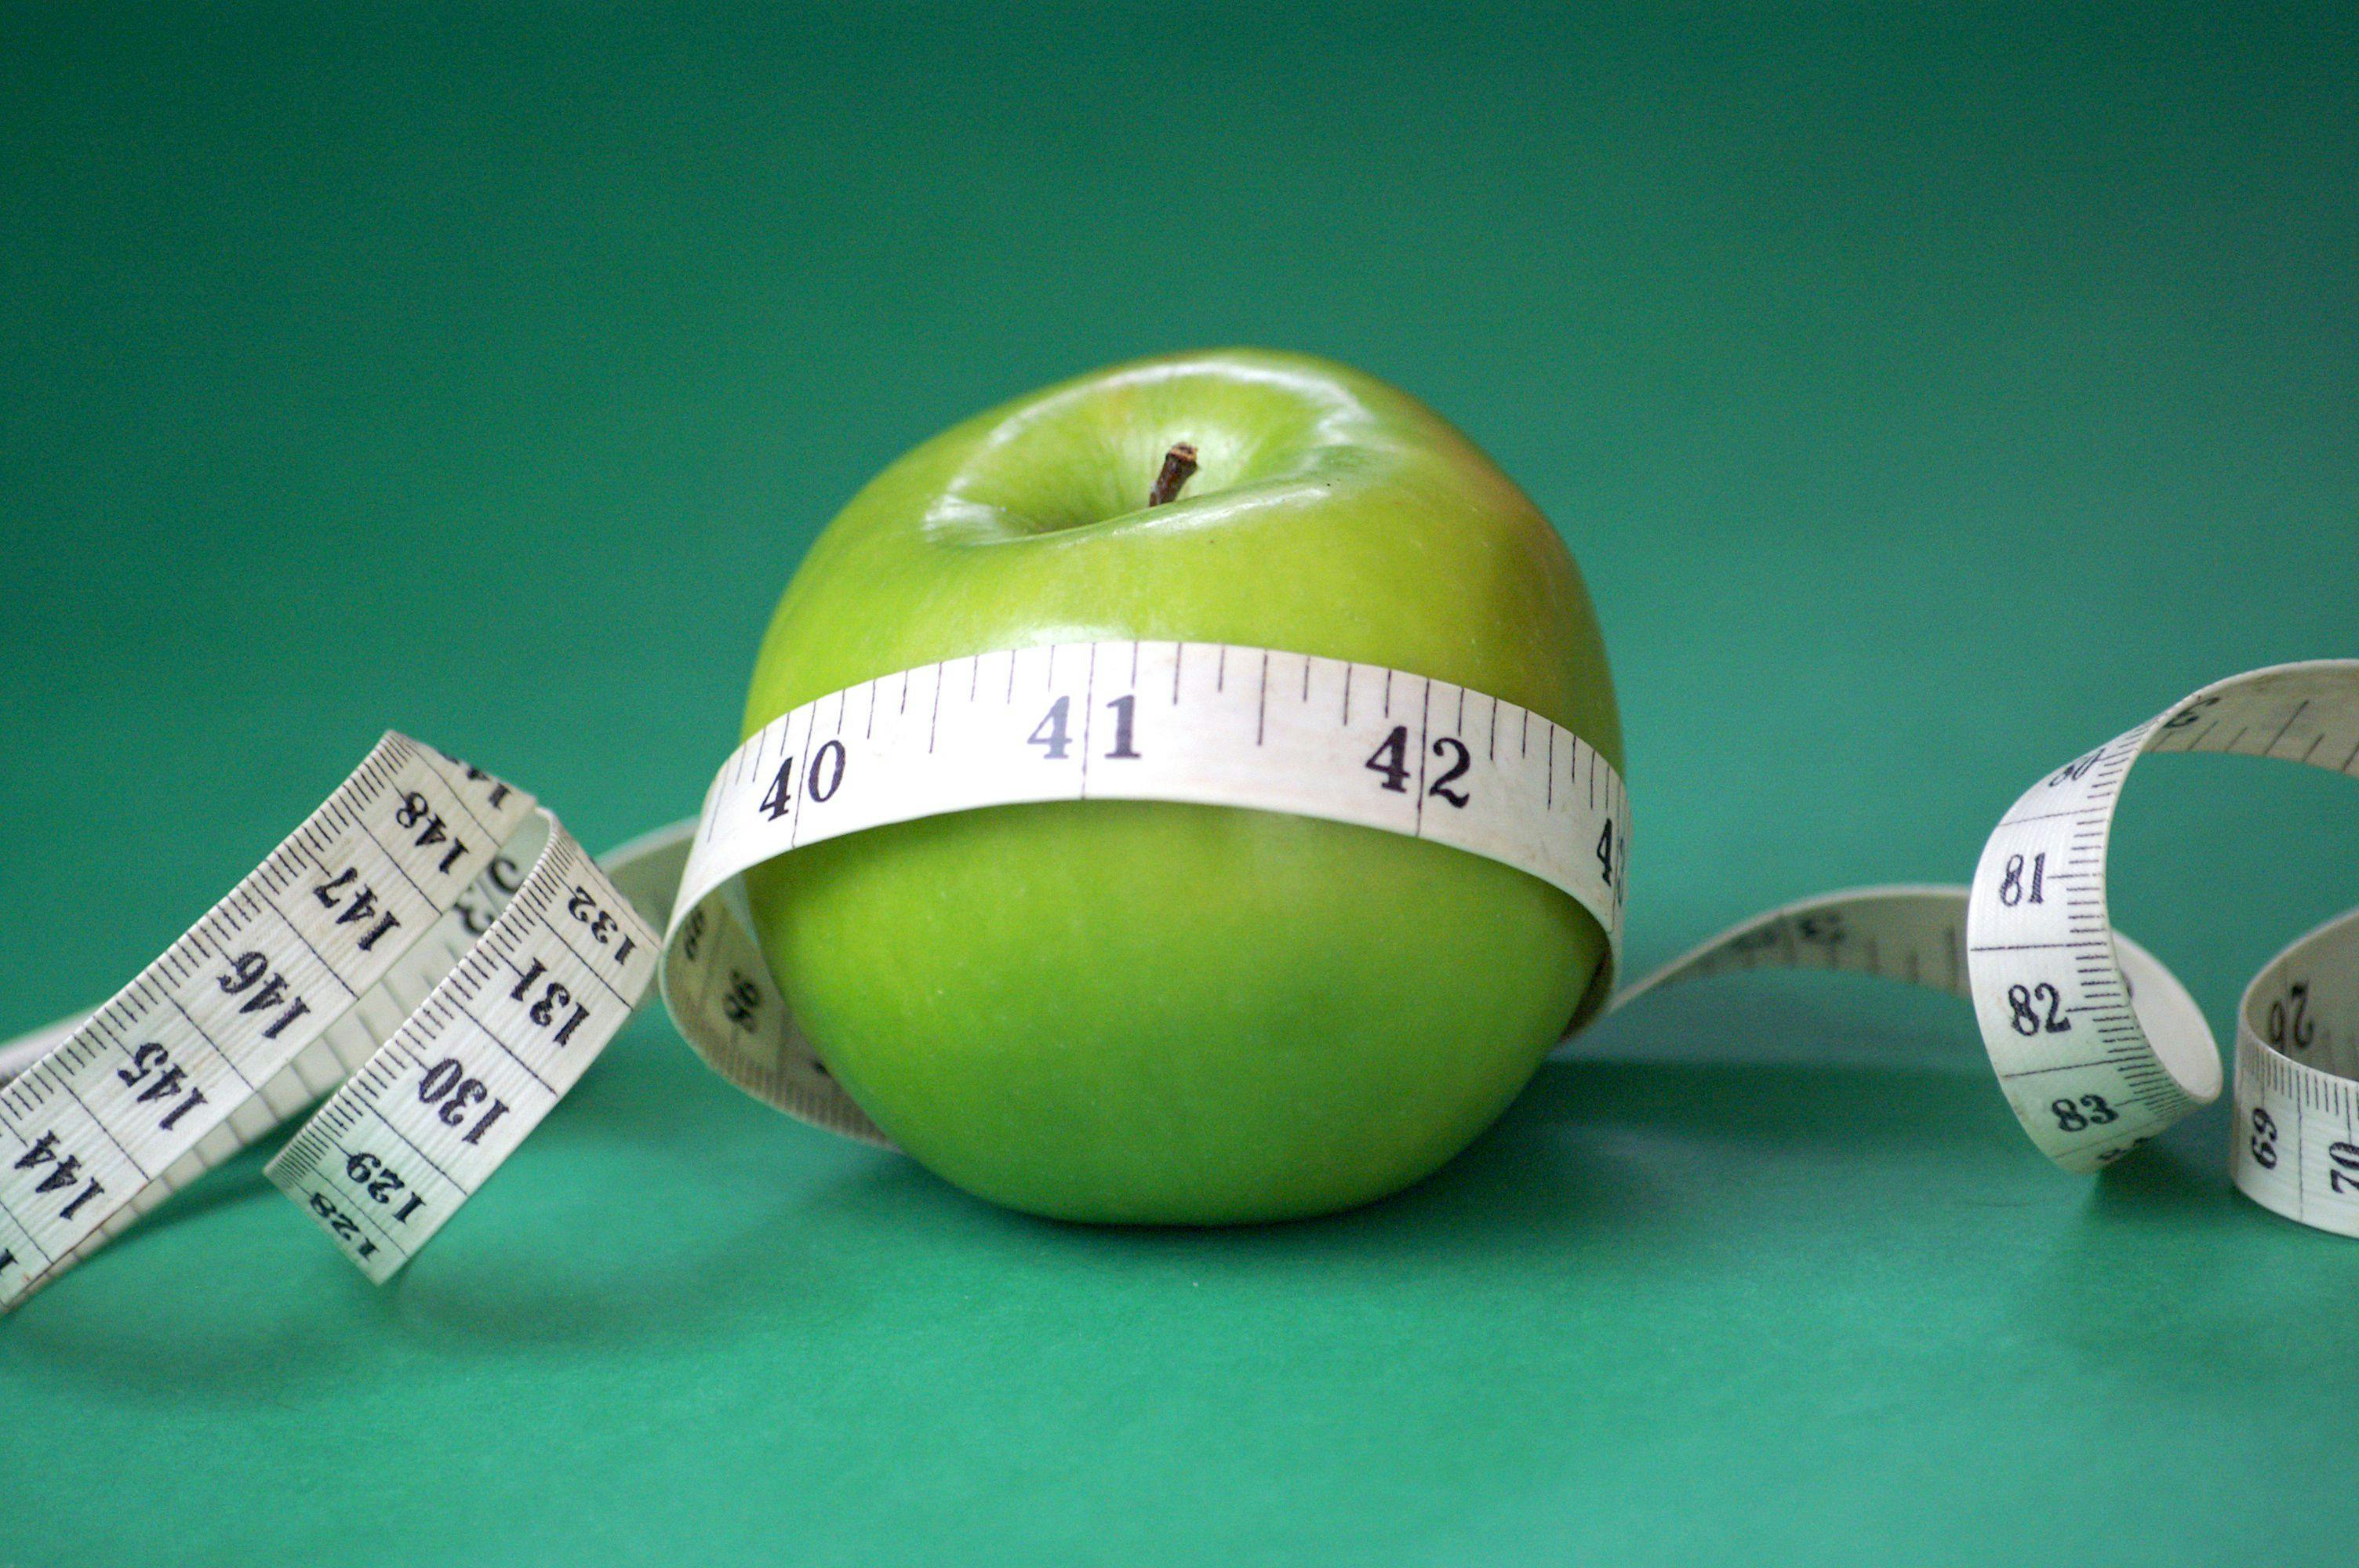 Early Life BMI Plays Role in Future Diabetes and CVD Risk, Regardless of Adult BMI